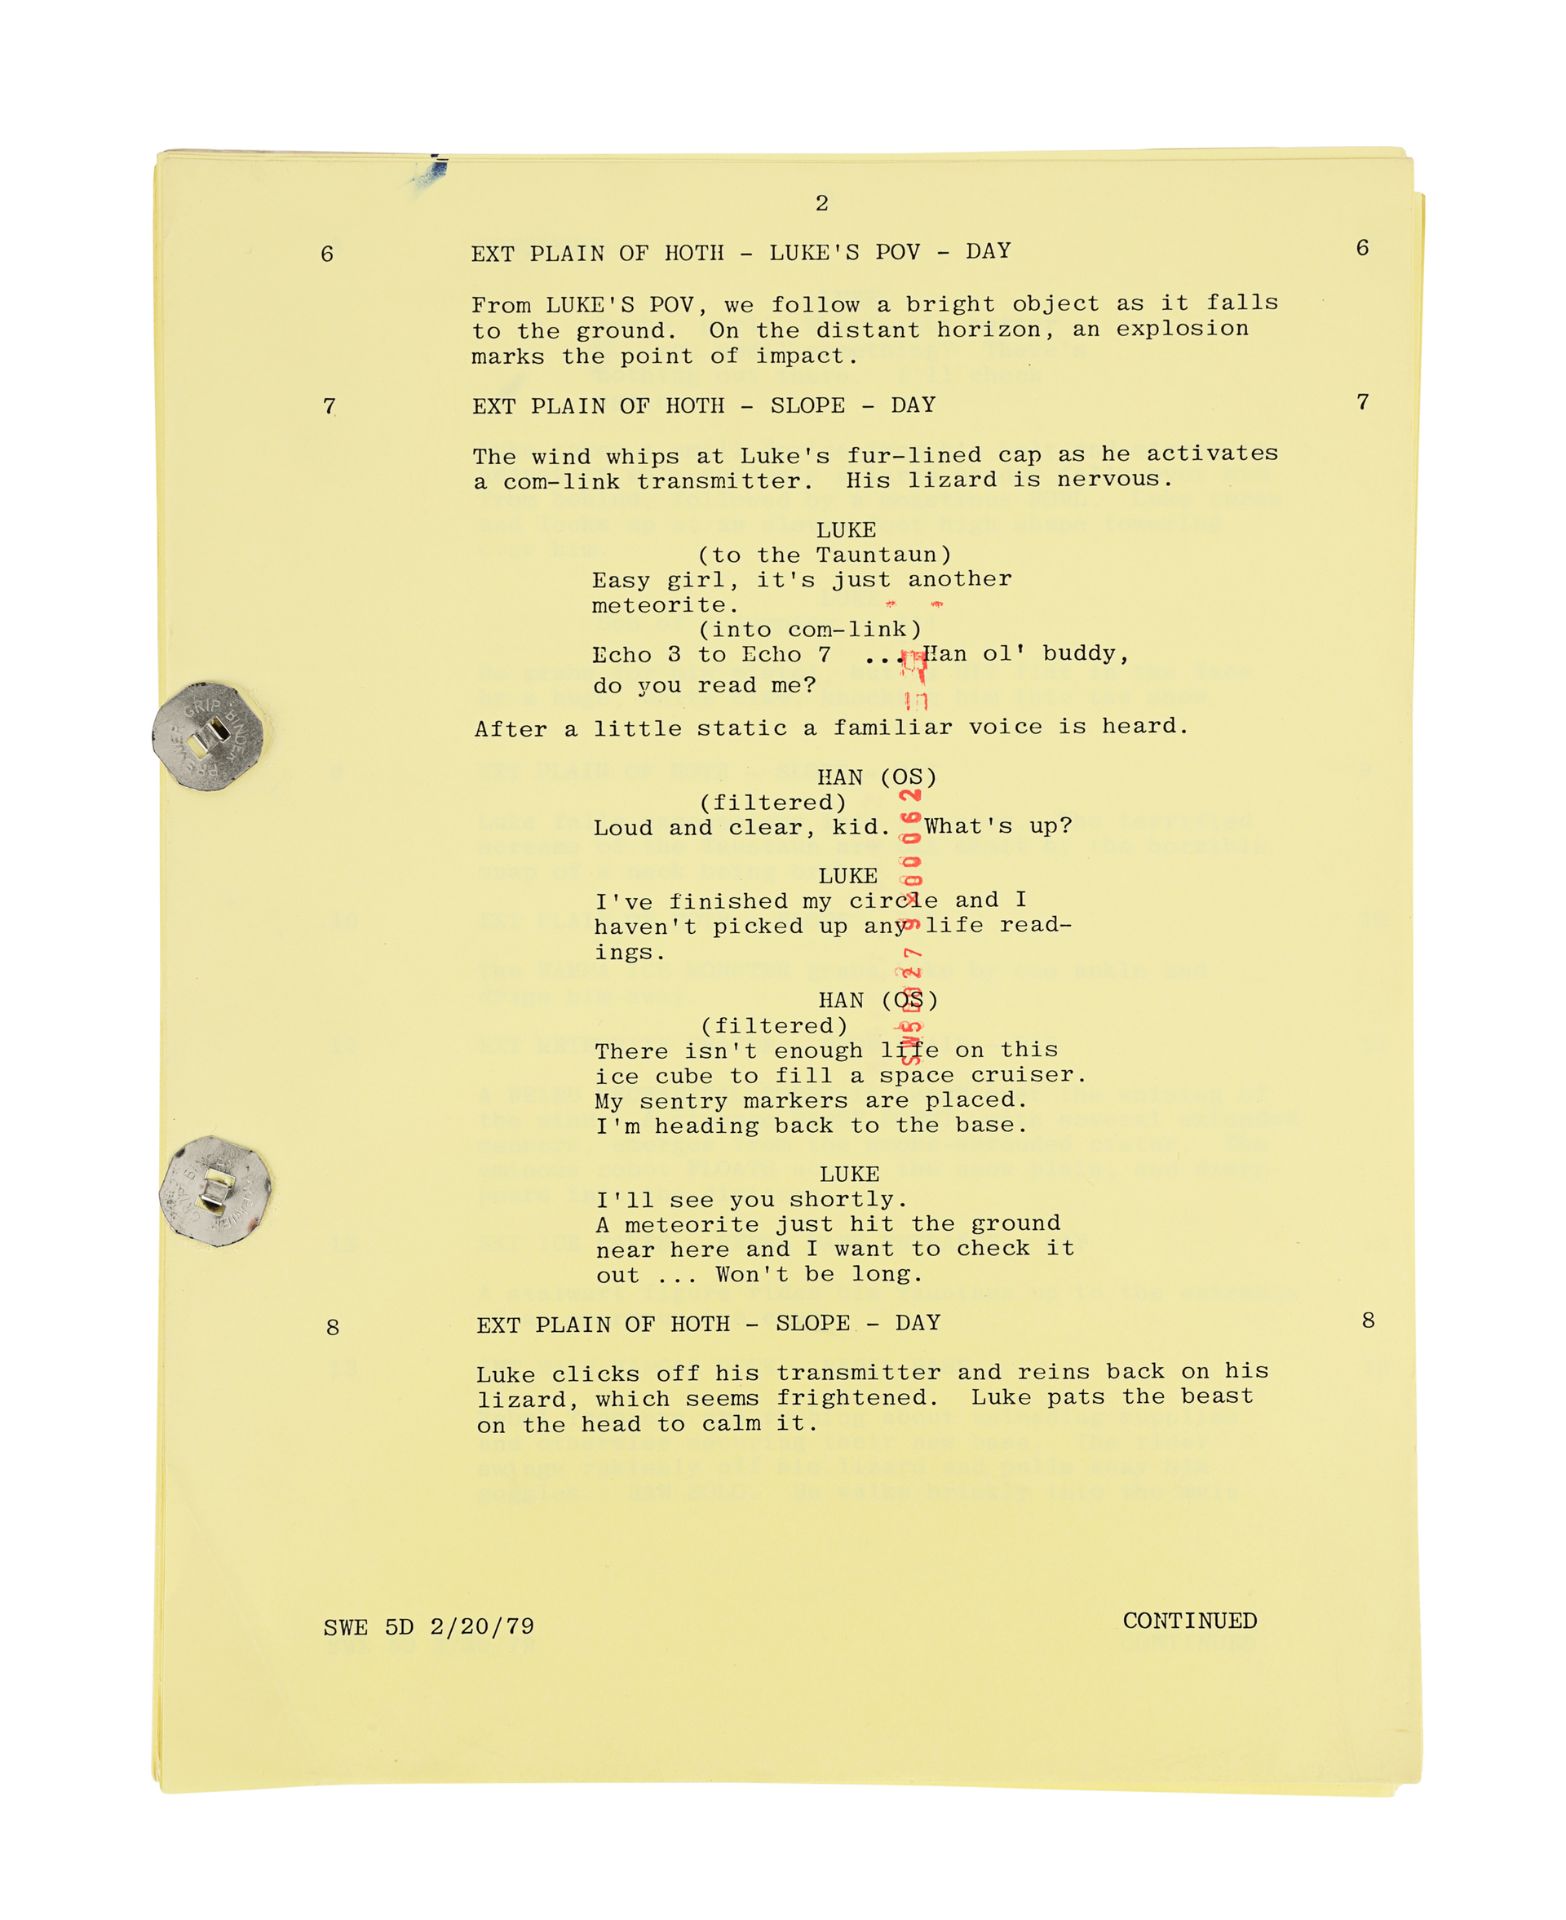 STAR WARS: THE EMPIRE STRIKES BACK (1980) - Anthony Daniels Collection: Hand-annotated Partial Scrip